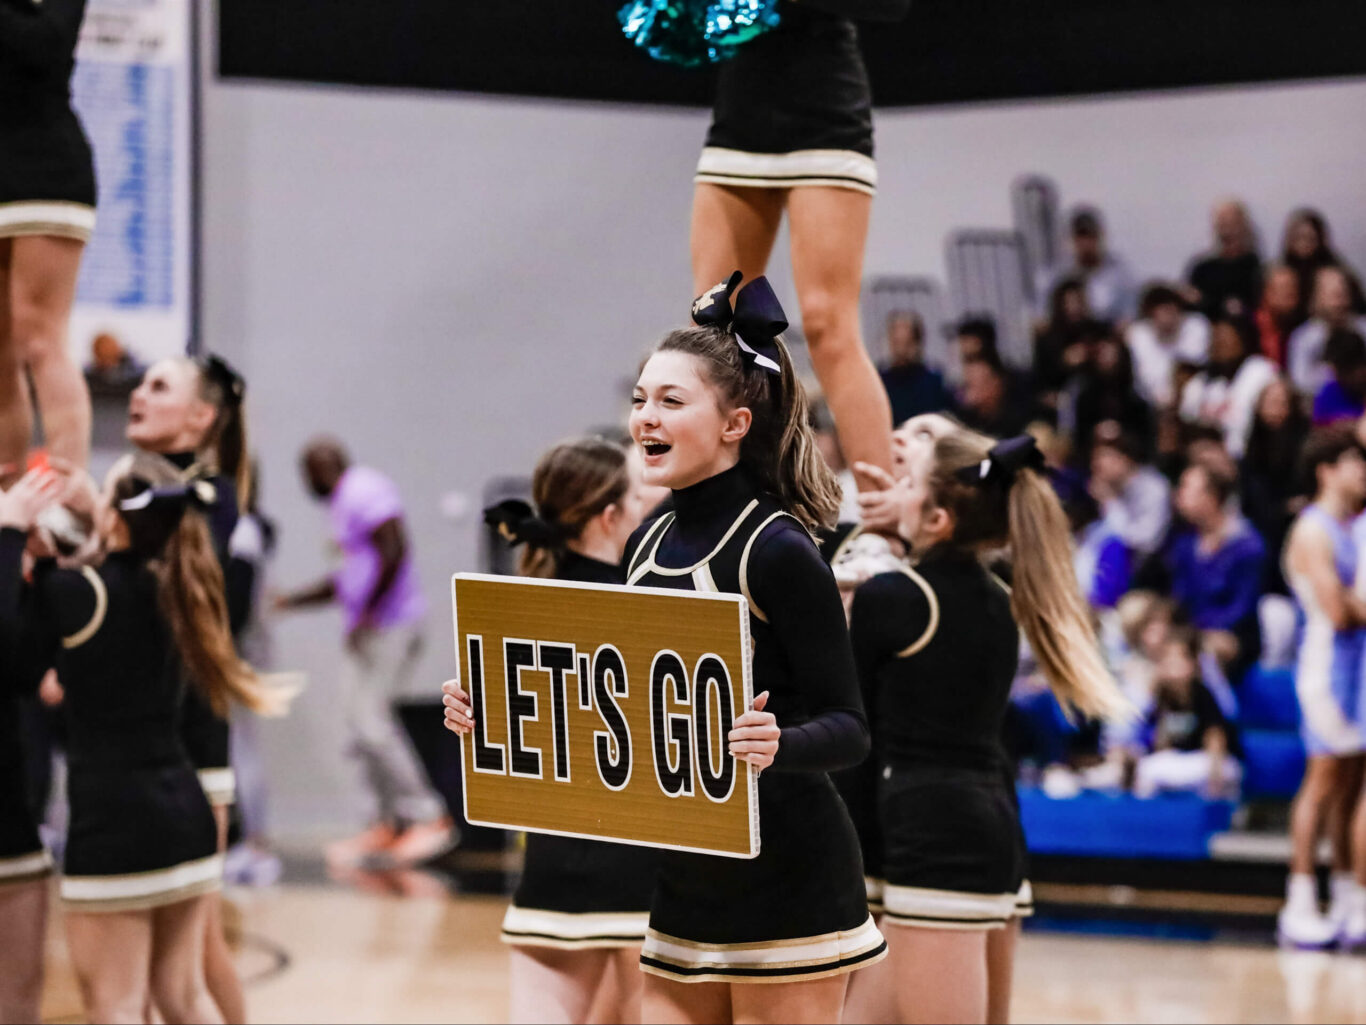 A competitive cheerleader holds up a sign that says let's go.